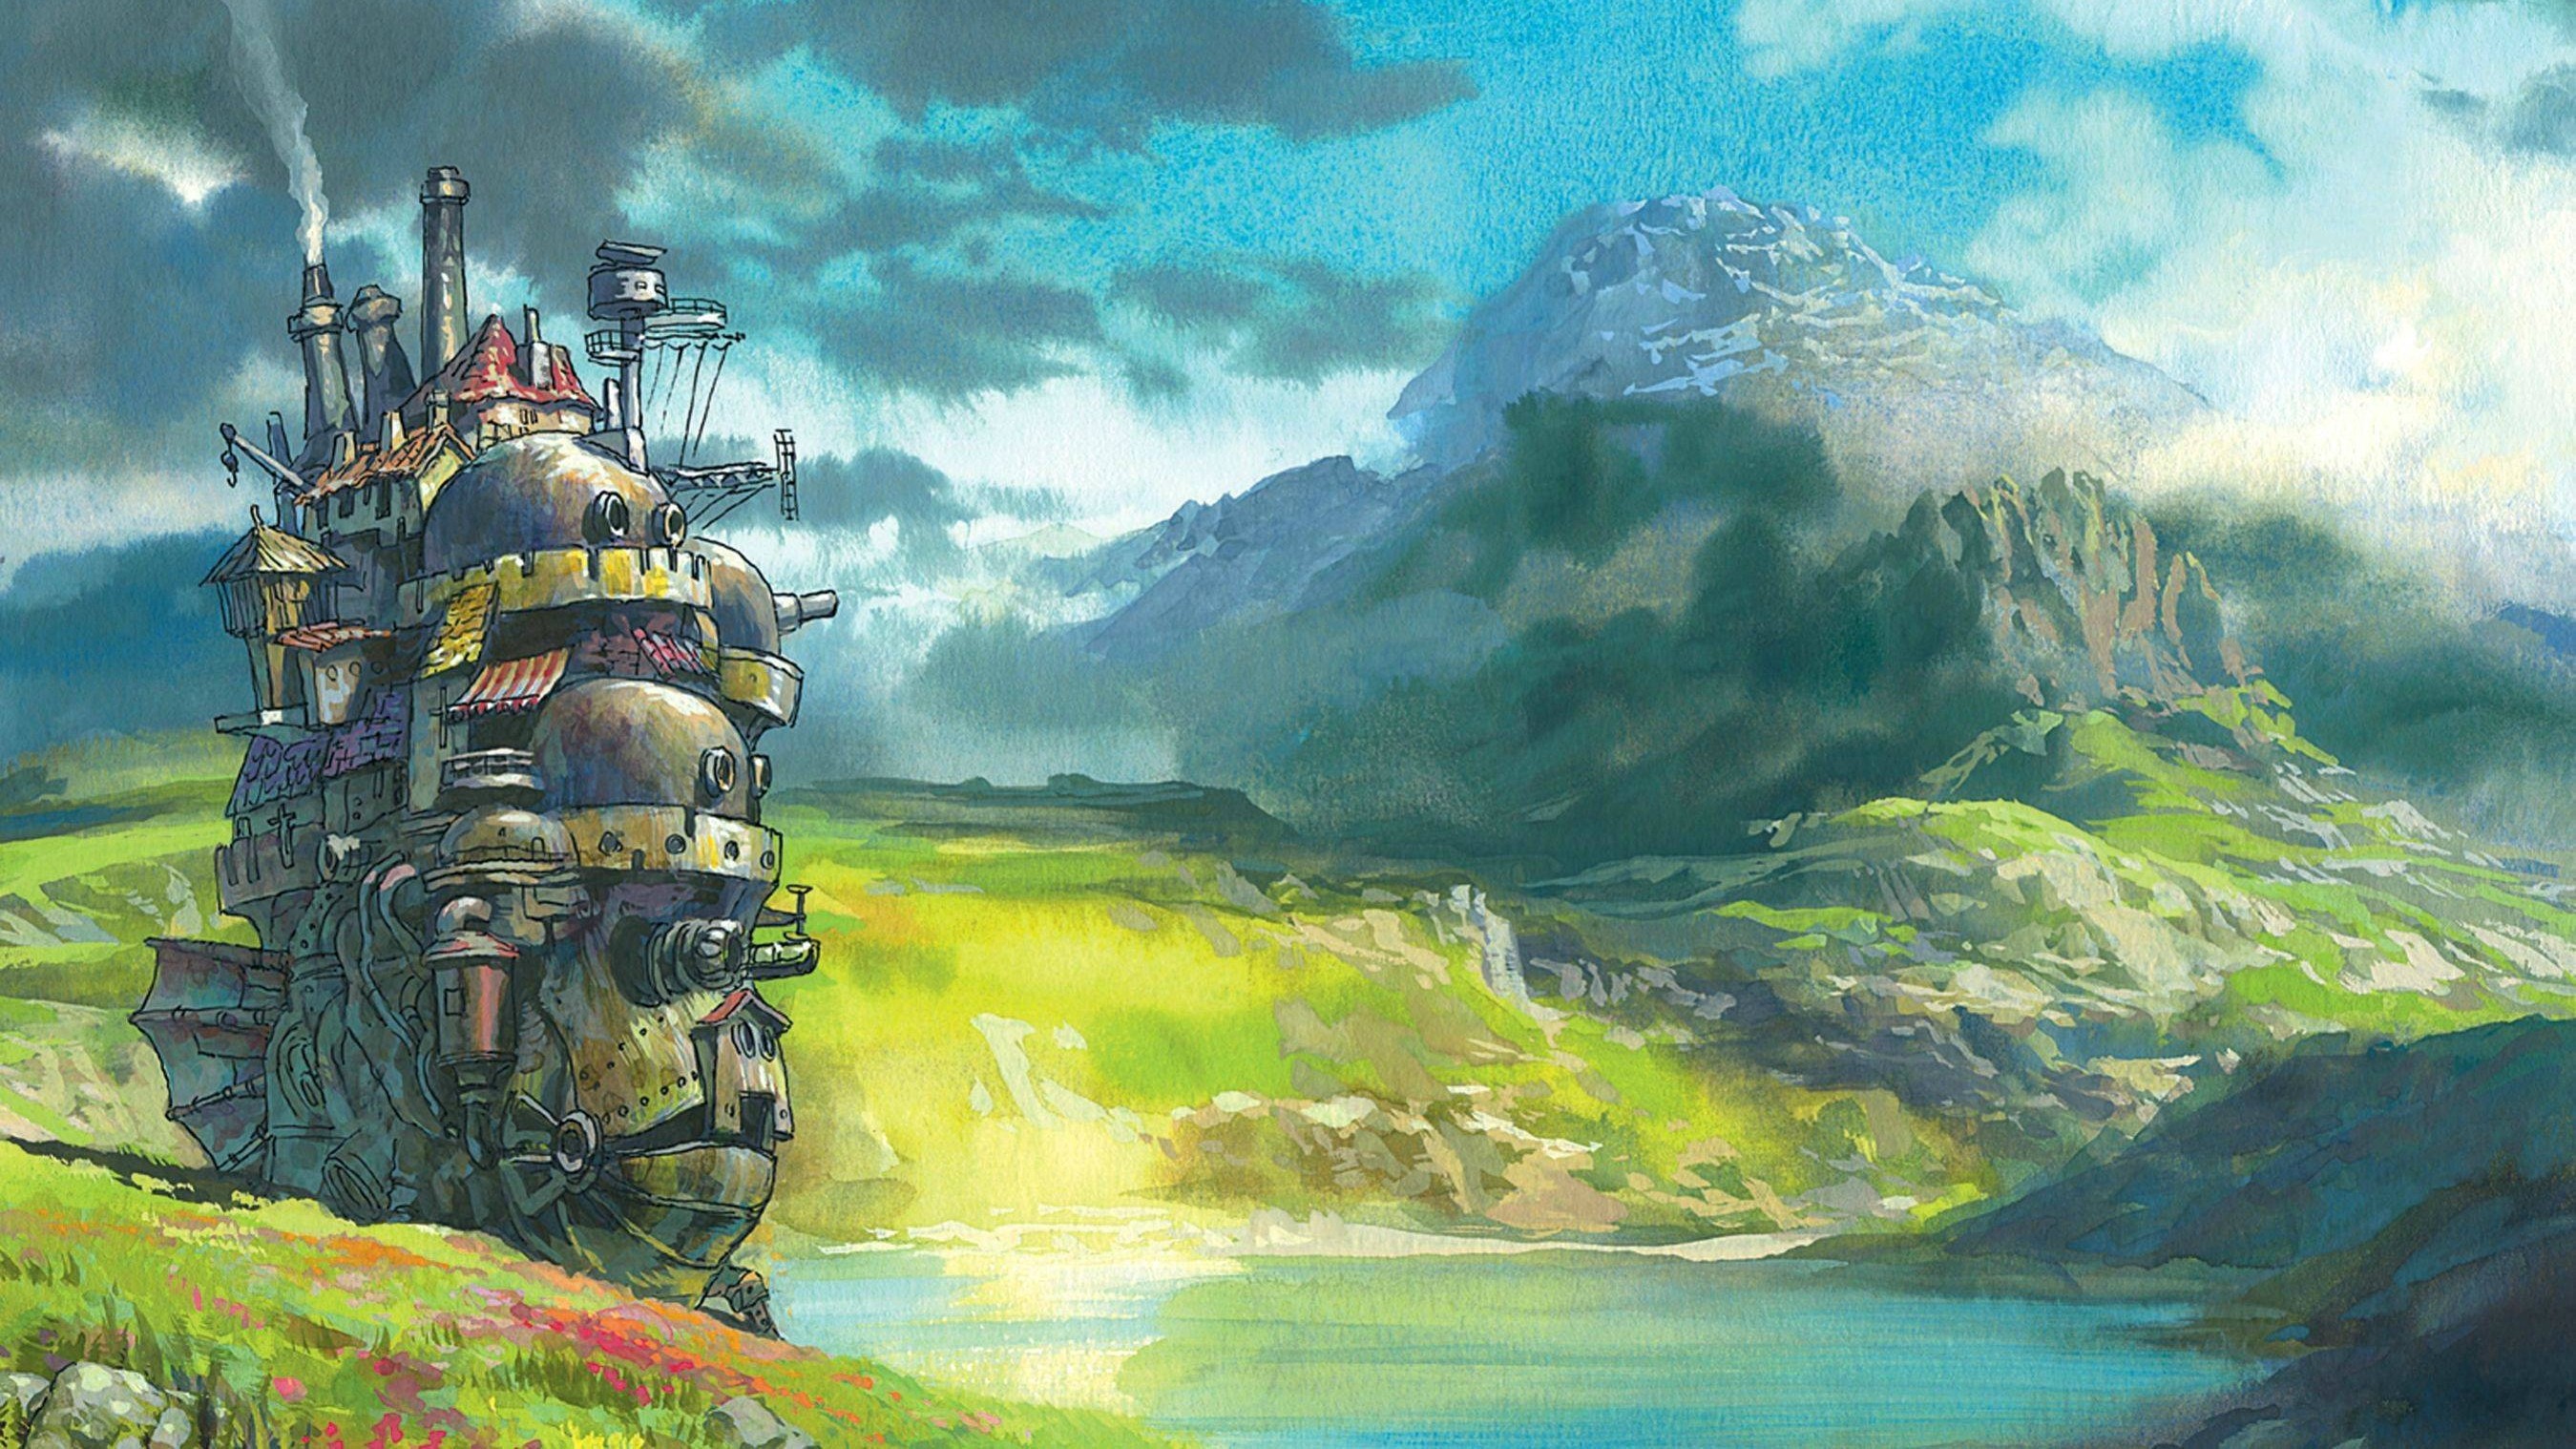 Unduh 67 Iphone Howl S Moving Castle Wallpaper Foto Viral Posts Id